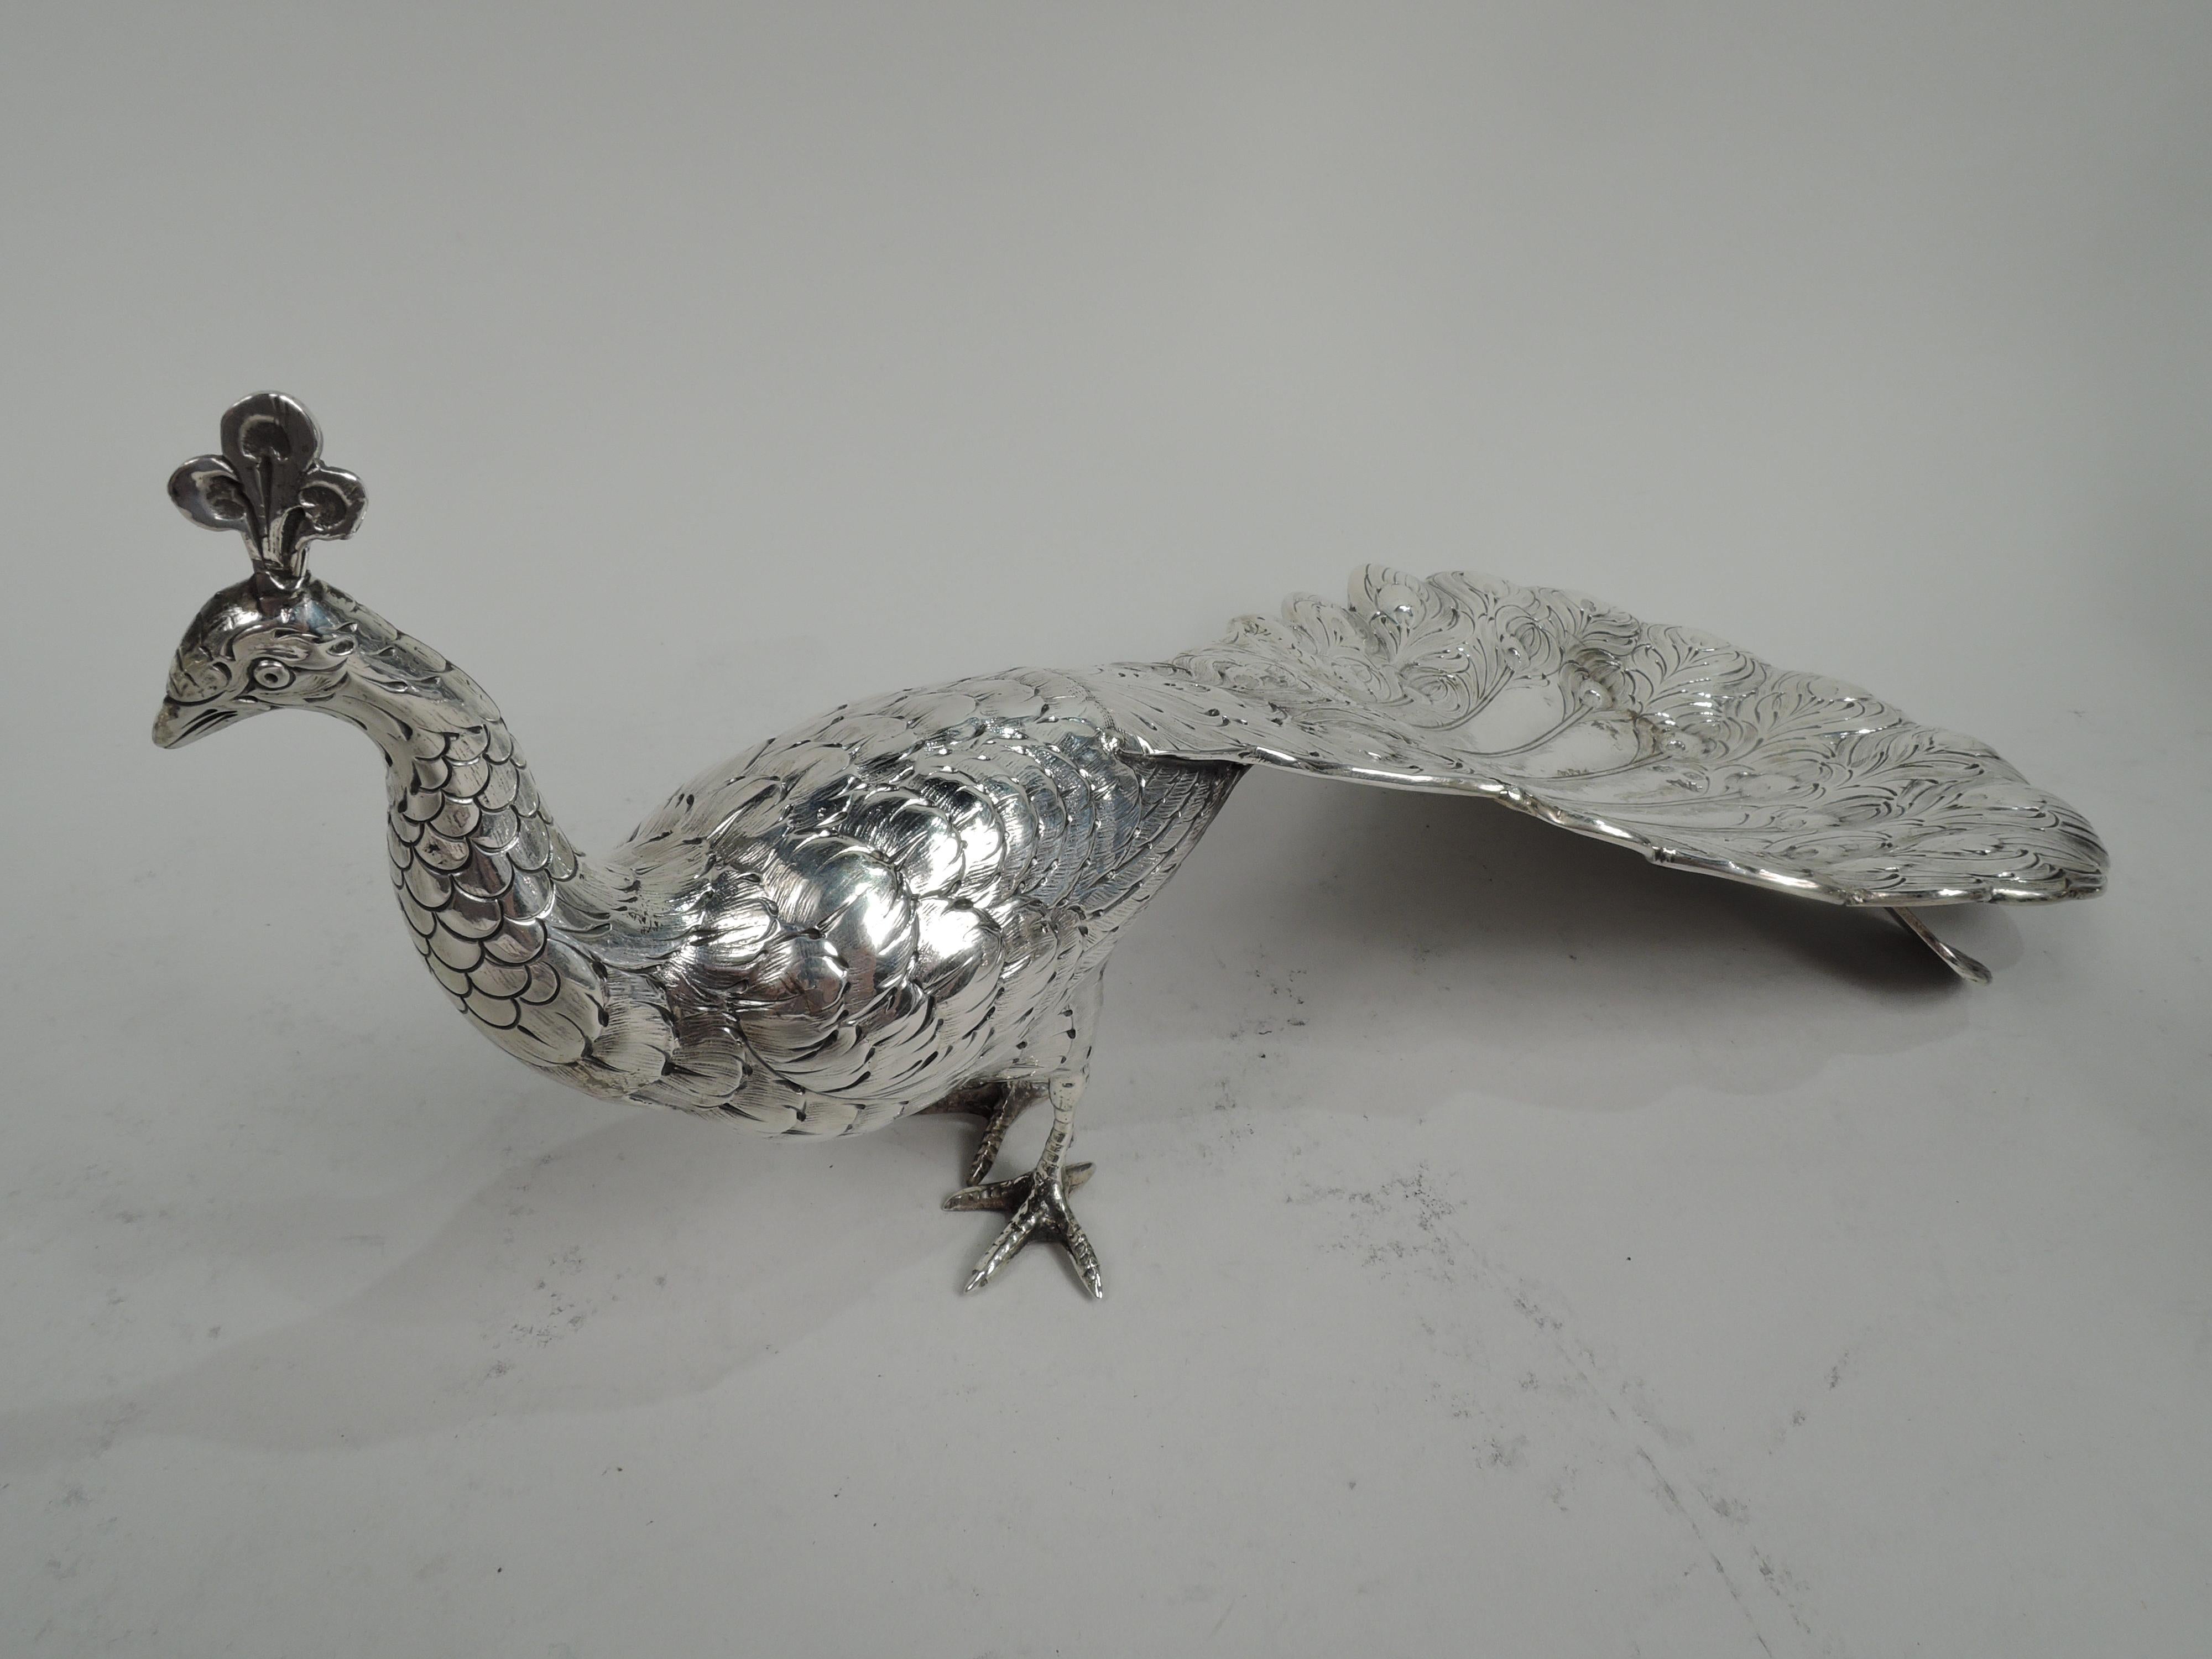 Pair of German 800 silver peacocks, ca 1910. Each: Upright neck and small graceful head supporting a foppish crest. Scaly talons. Ovoid body with dense imbricated feathers and dramatic tail downed and concave for holding treats. Gorgeous but aloof